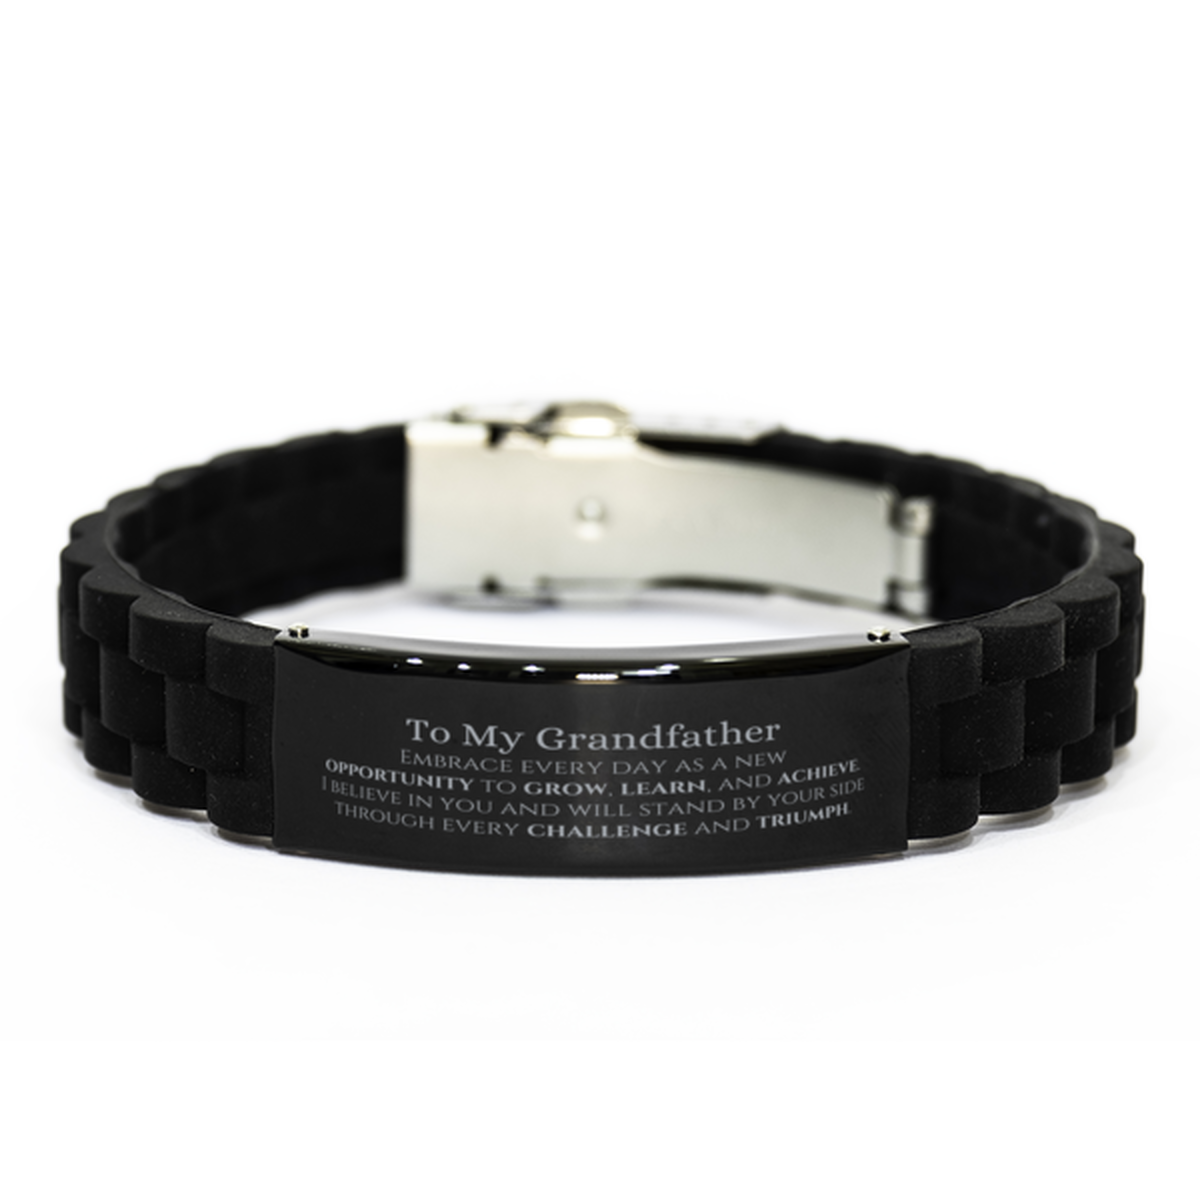 To My Grandfather Gifts, I believe in you and will stand by your side, Inspirational Black Glidelock Clasp Bracelet For Grandfather, Birthday Christmas Motivational Grandfather Gifts